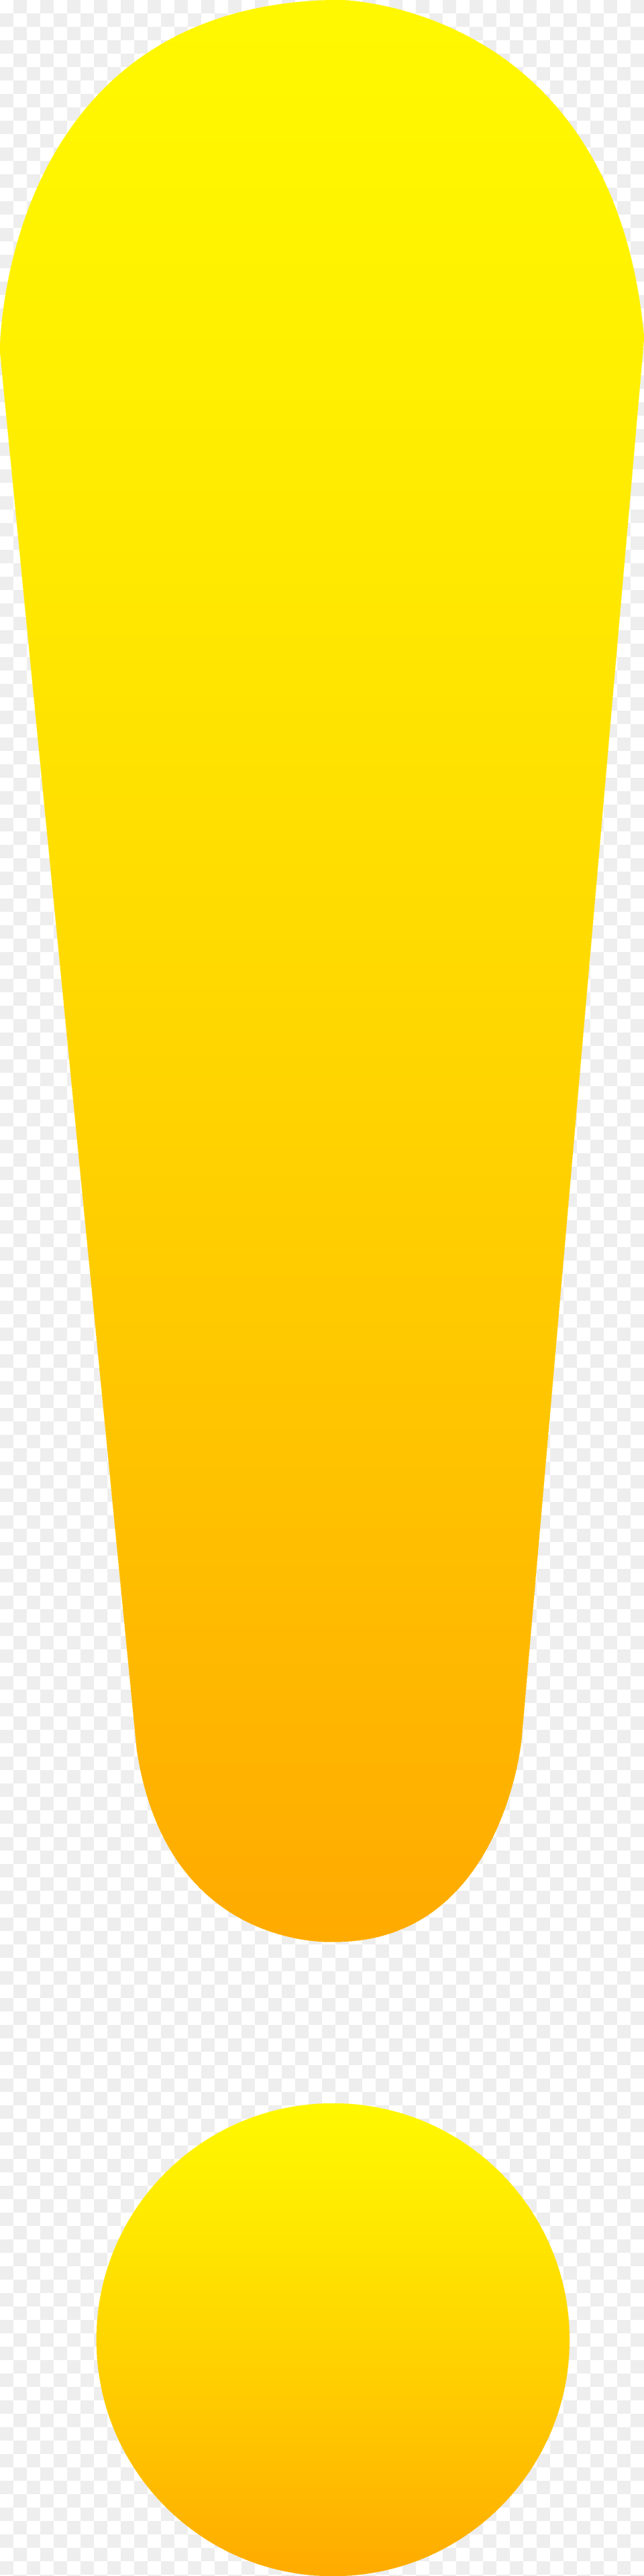 Exclamation Mark Yellow Exclamation Mark Icon, Beverage, Juice, Bowl, Glass Free Transparent Png